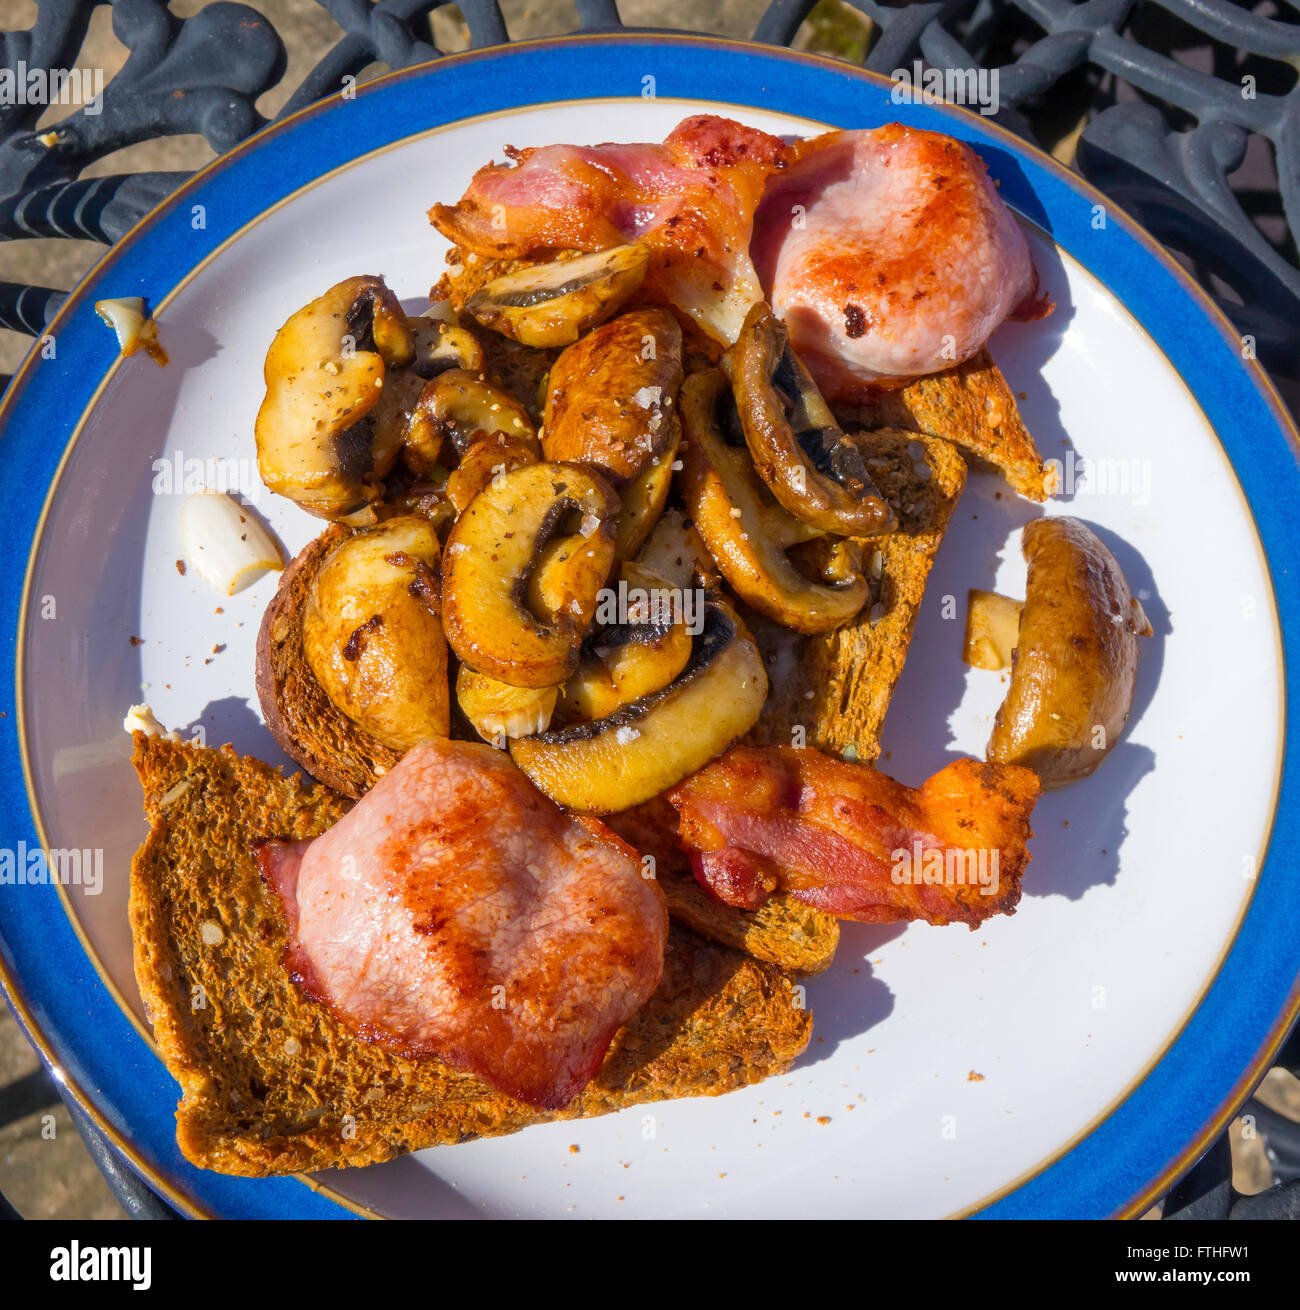 Lunch served on a garden table toasted multigrain bread with fried bacon and mushrooms Stock Photo